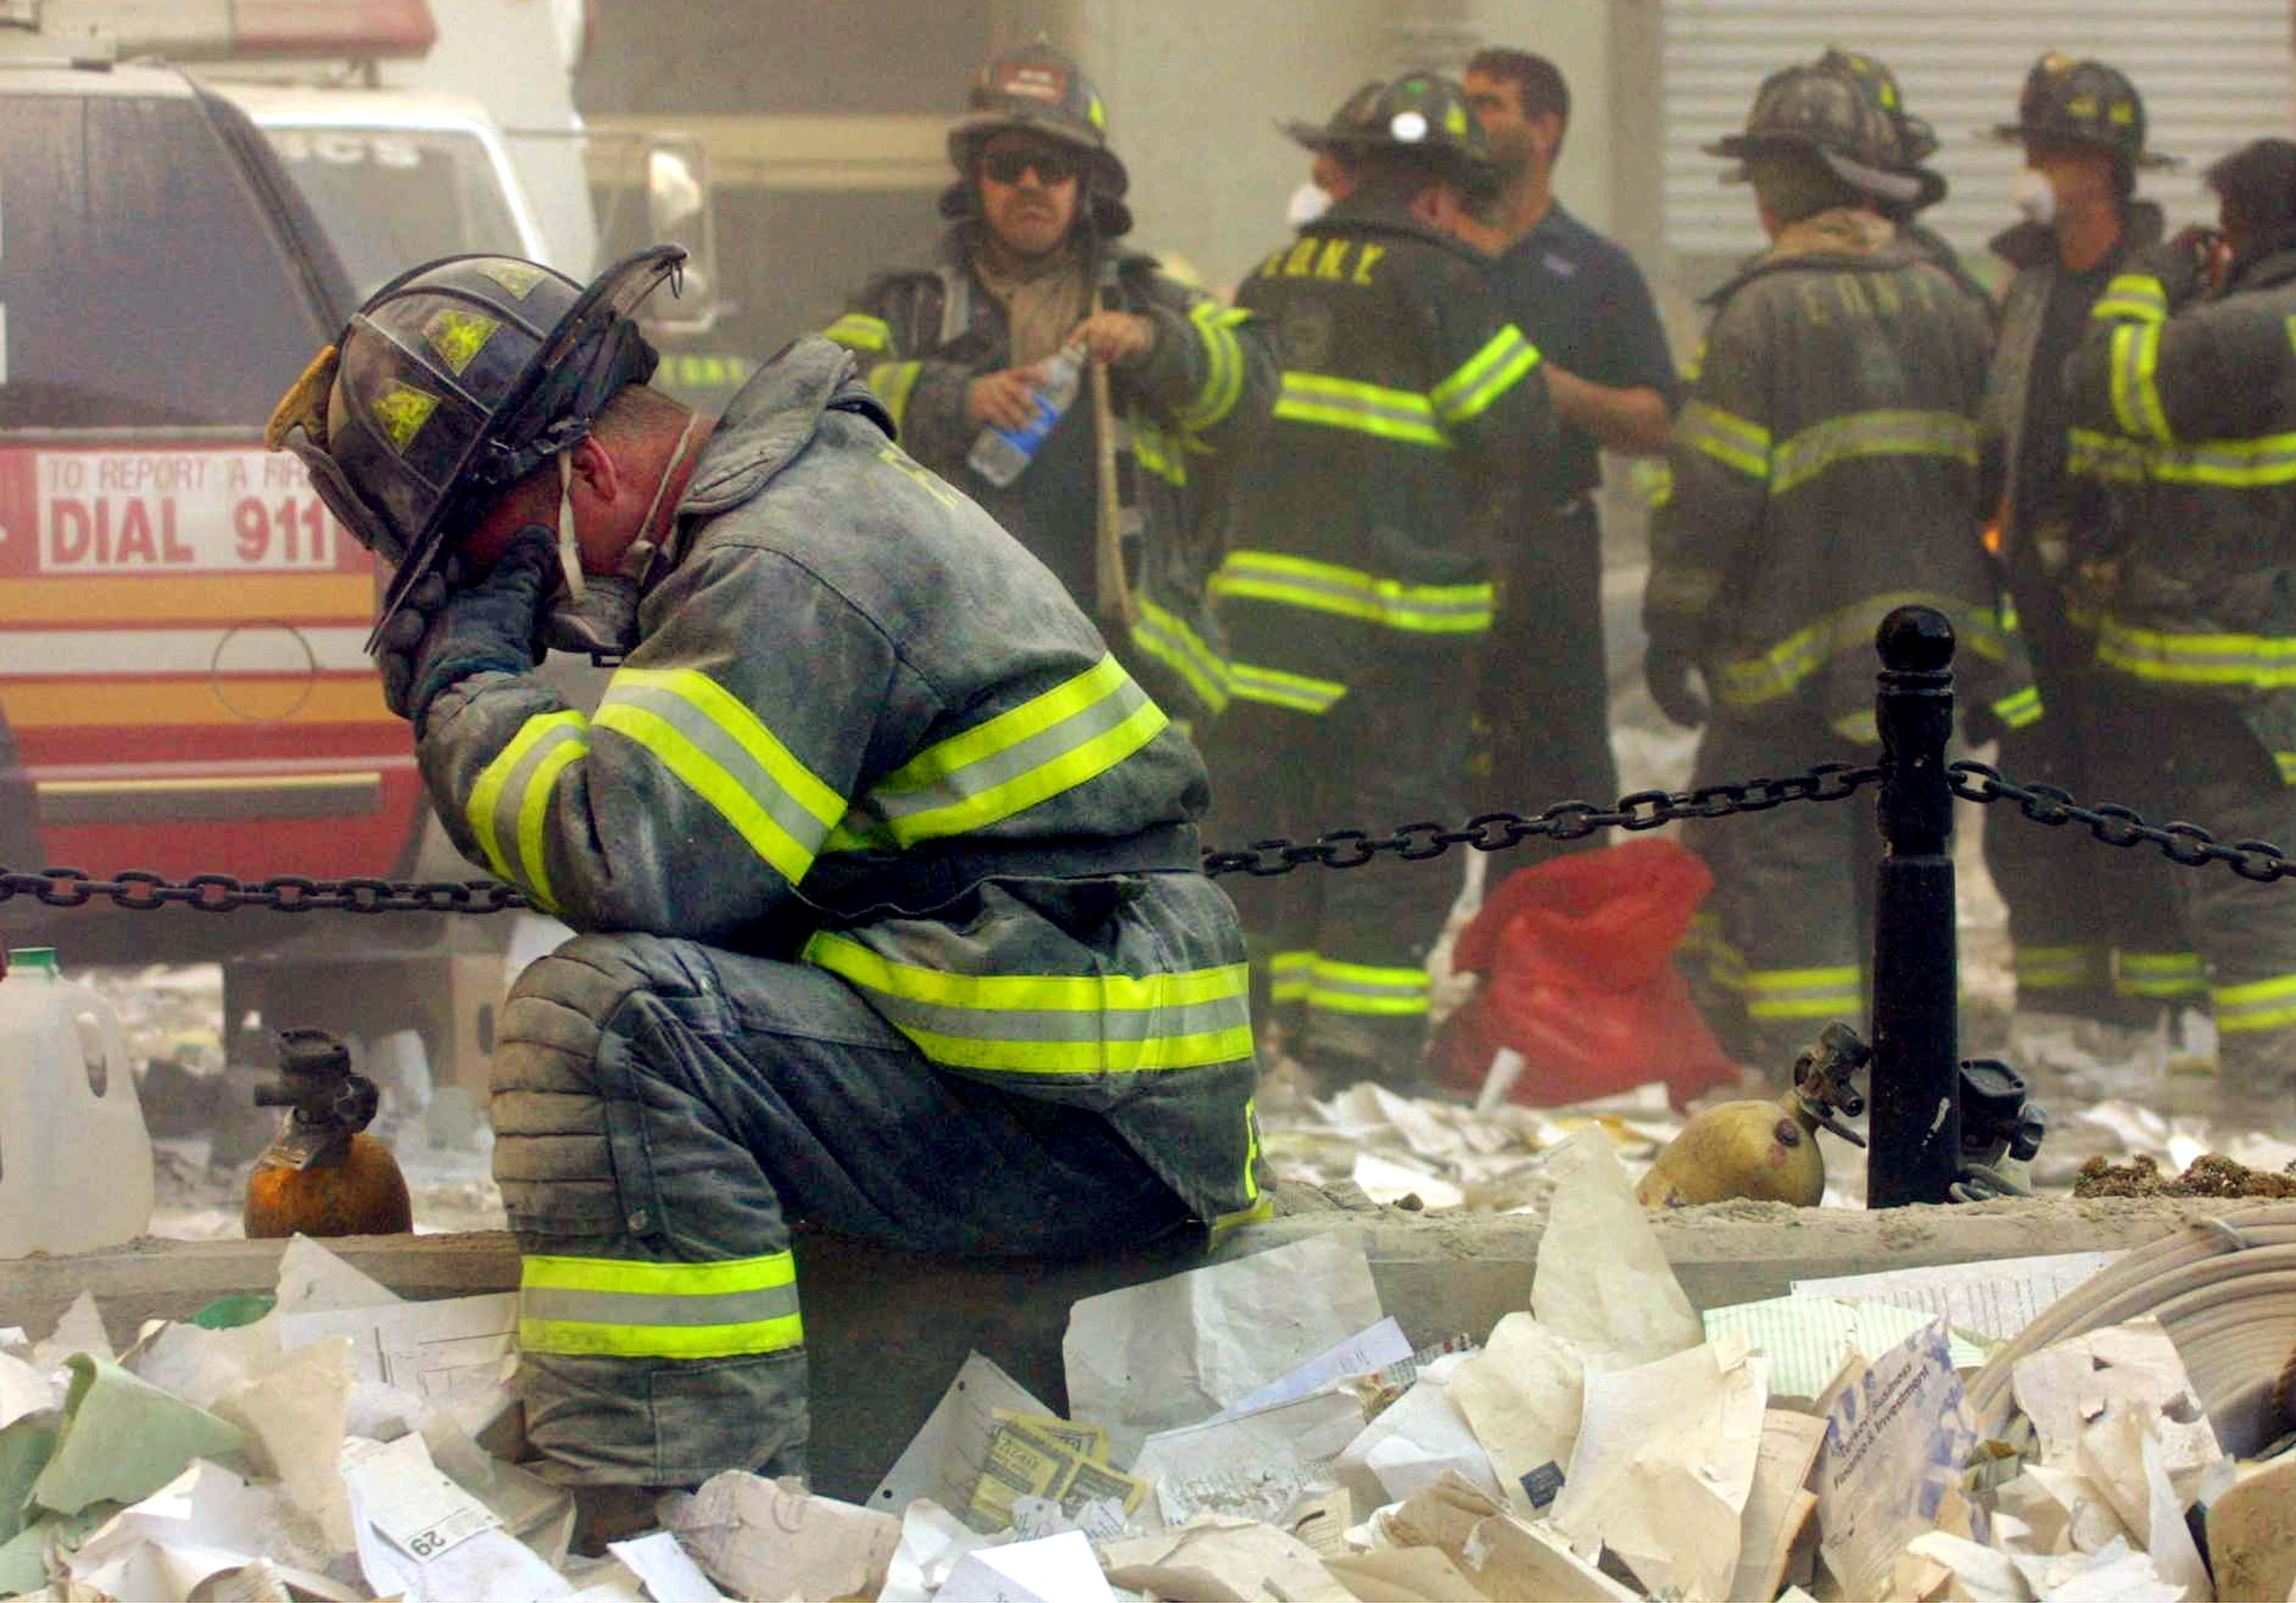 Firefighter Gerard McGibbon, of Engine 283 in Brownsville, Brooklyn, prays after the buildings collapsed